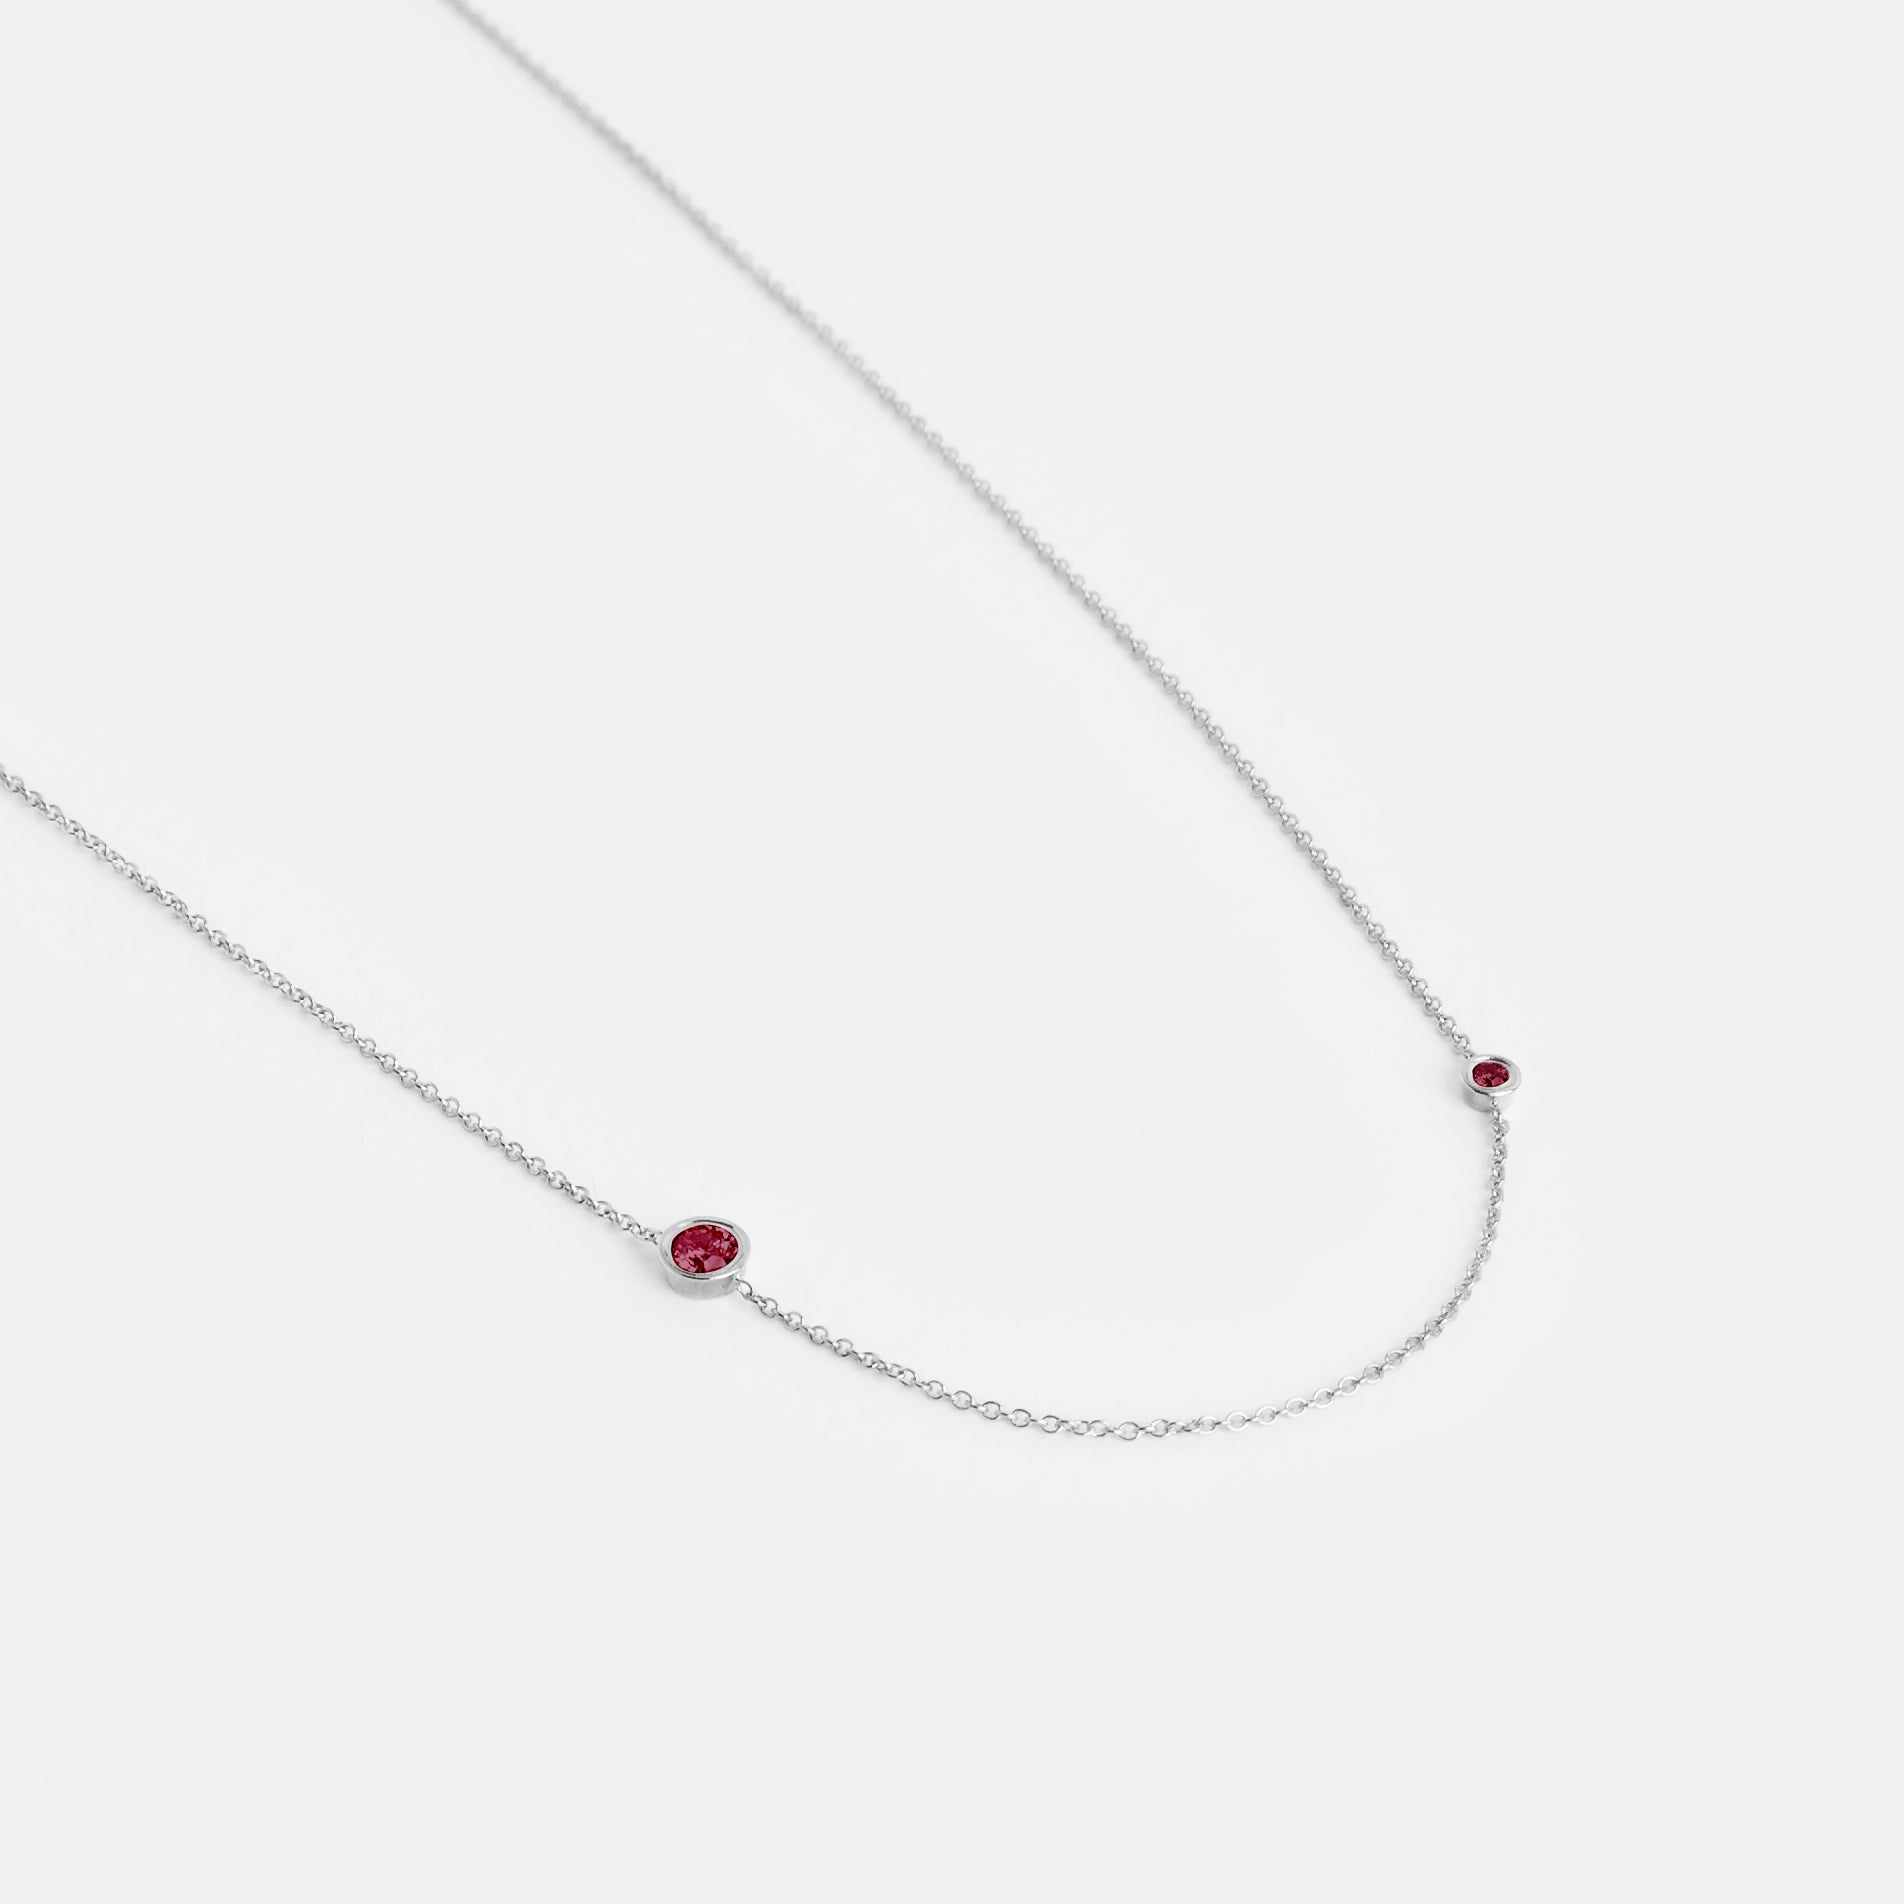 Iba Minimalist Necklace in 14k White Gold set with Rubies By SHW Fine Jewelry NYC